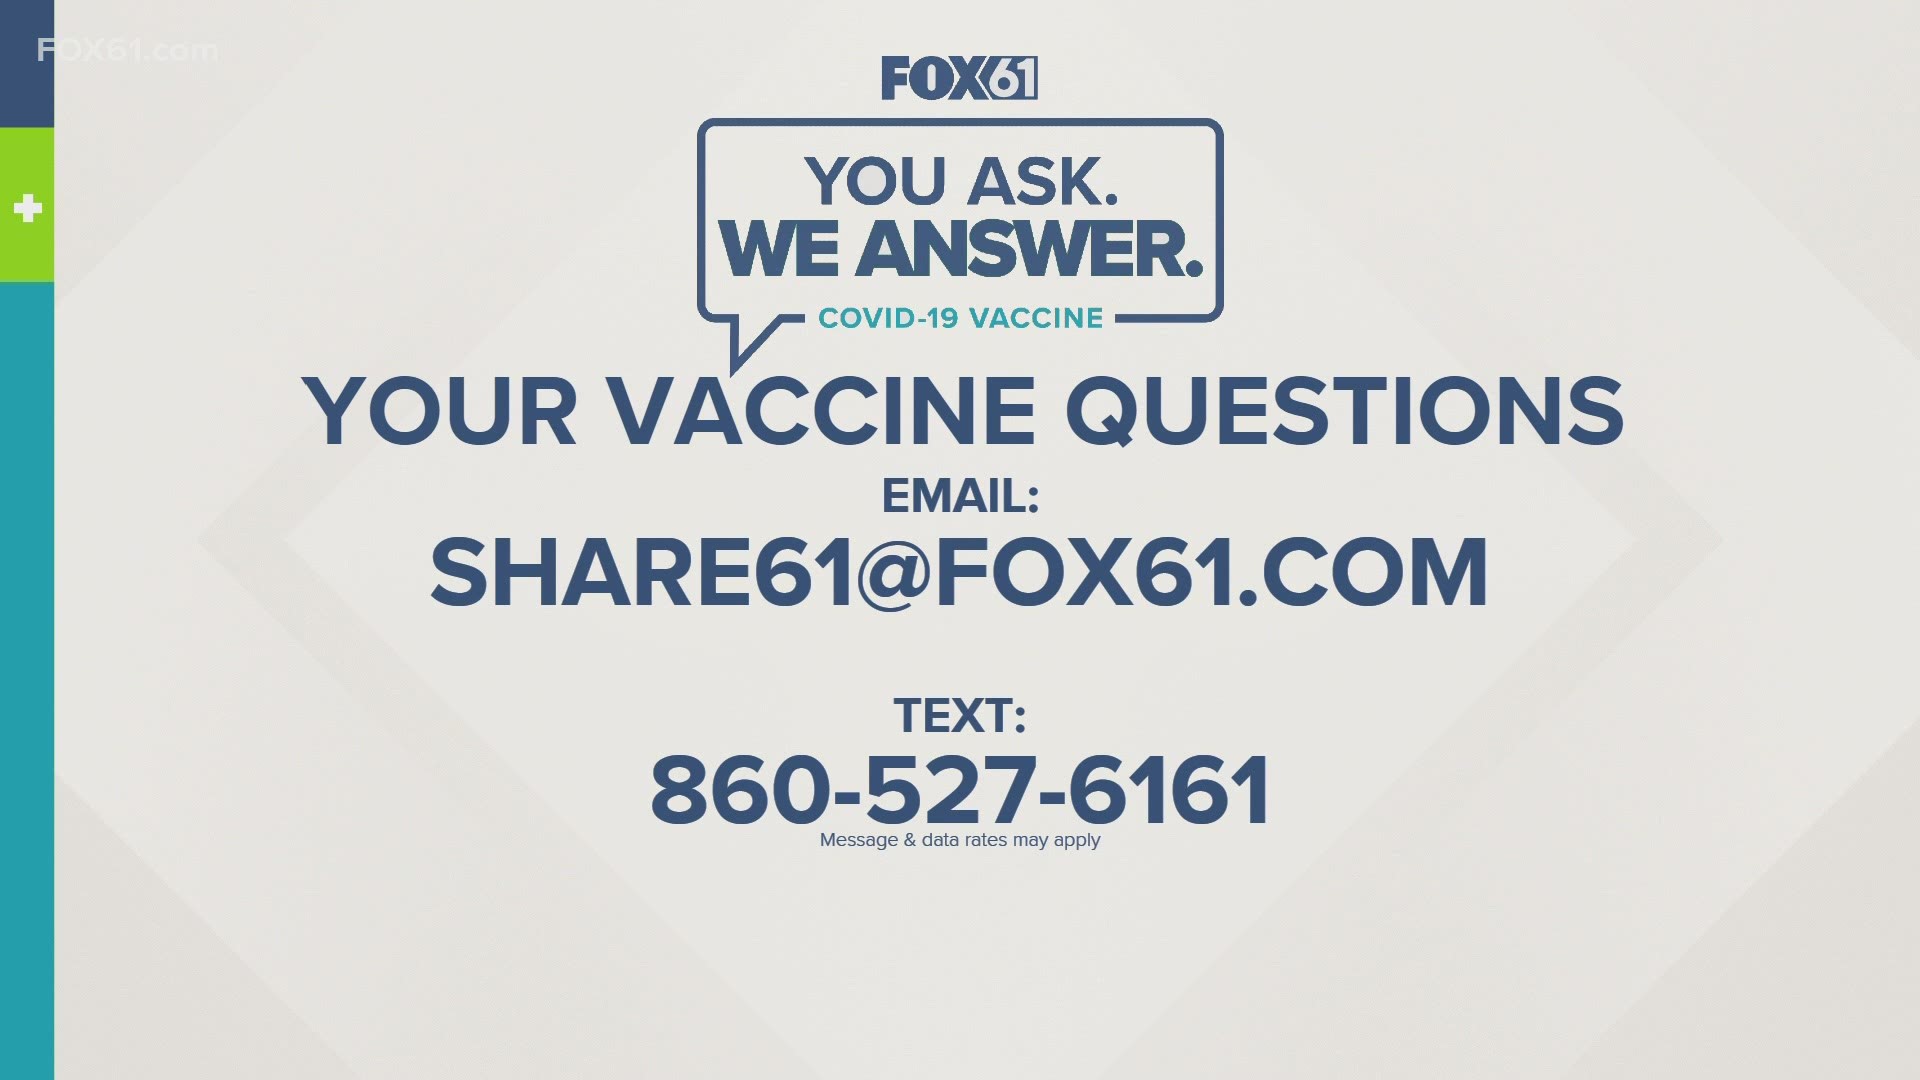 If you have a question you would like help answering, send an email to SHARE61@FOX61.COM, or text your question to 860-527-6161